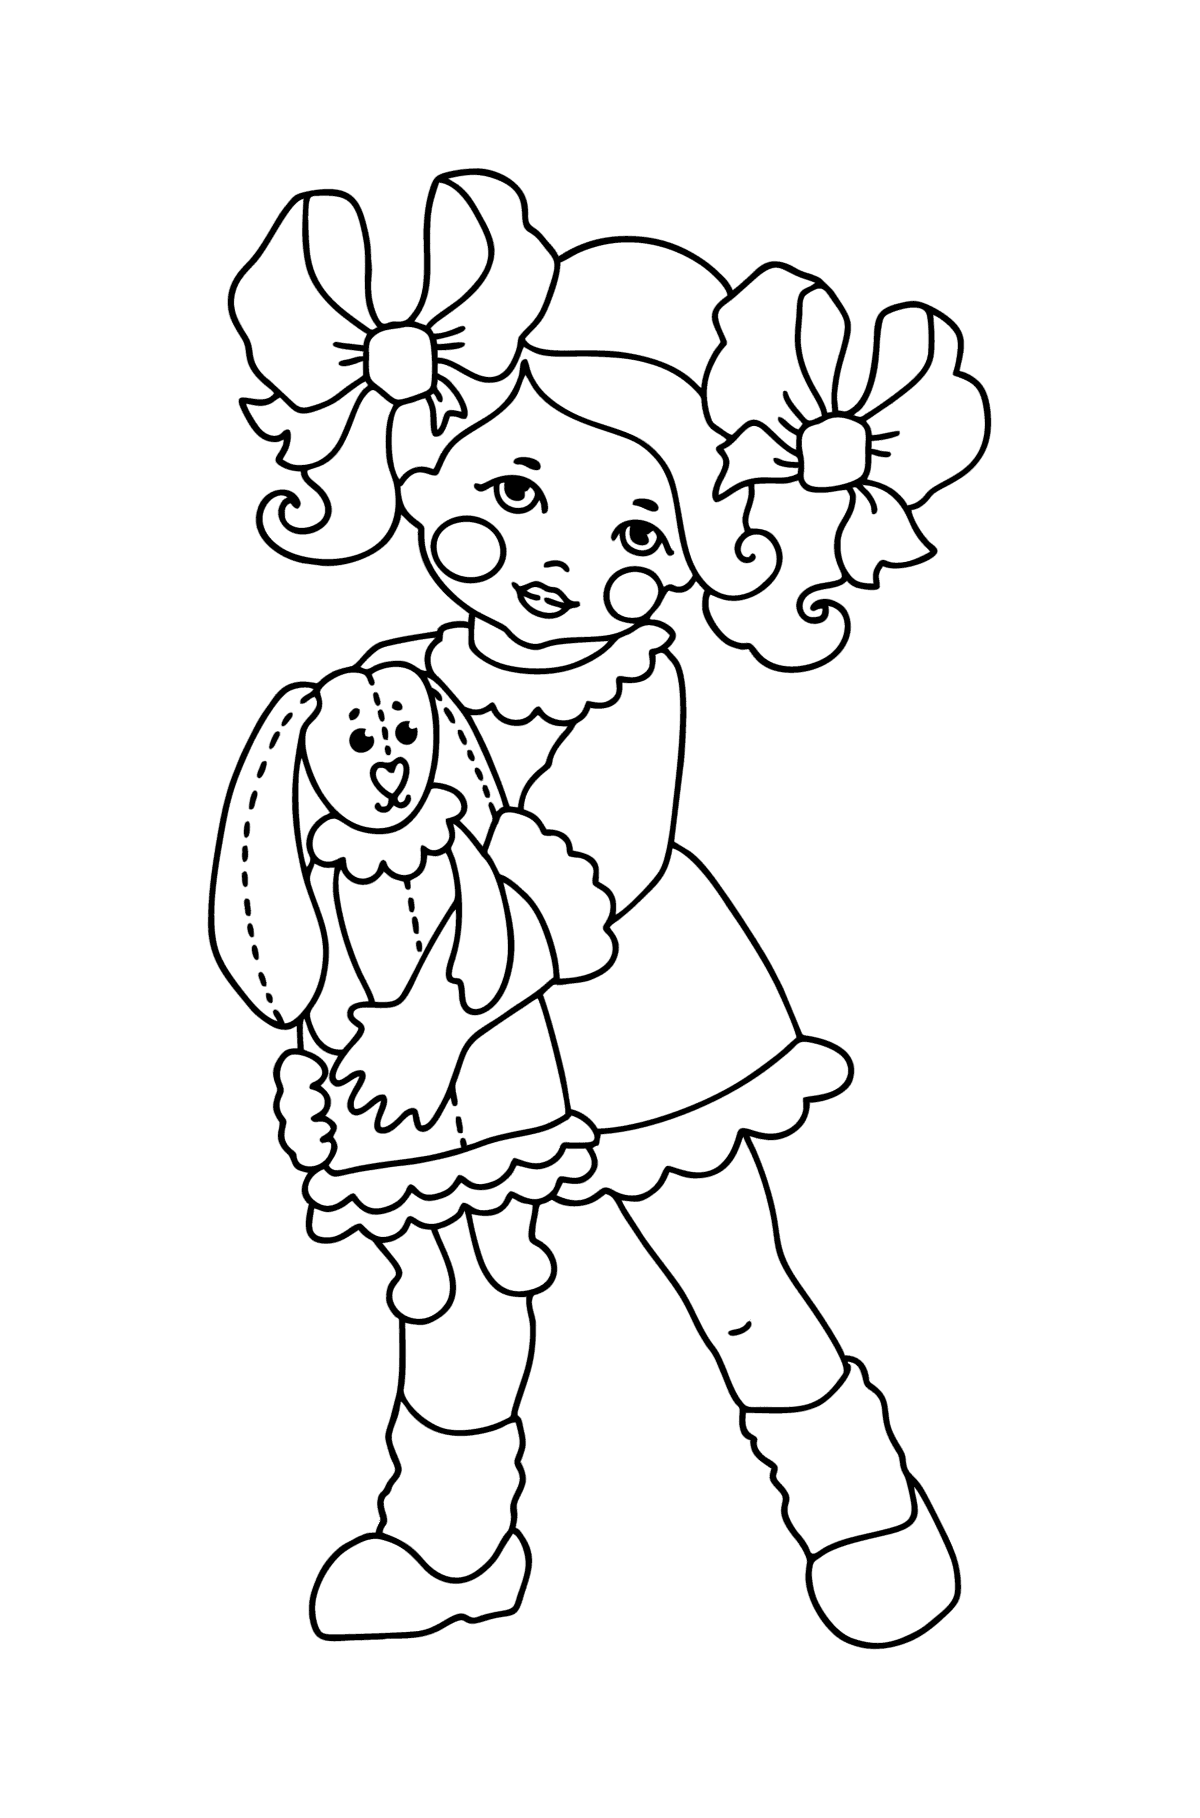 Girl and hare сoloring page - Coloring Pages for Kids